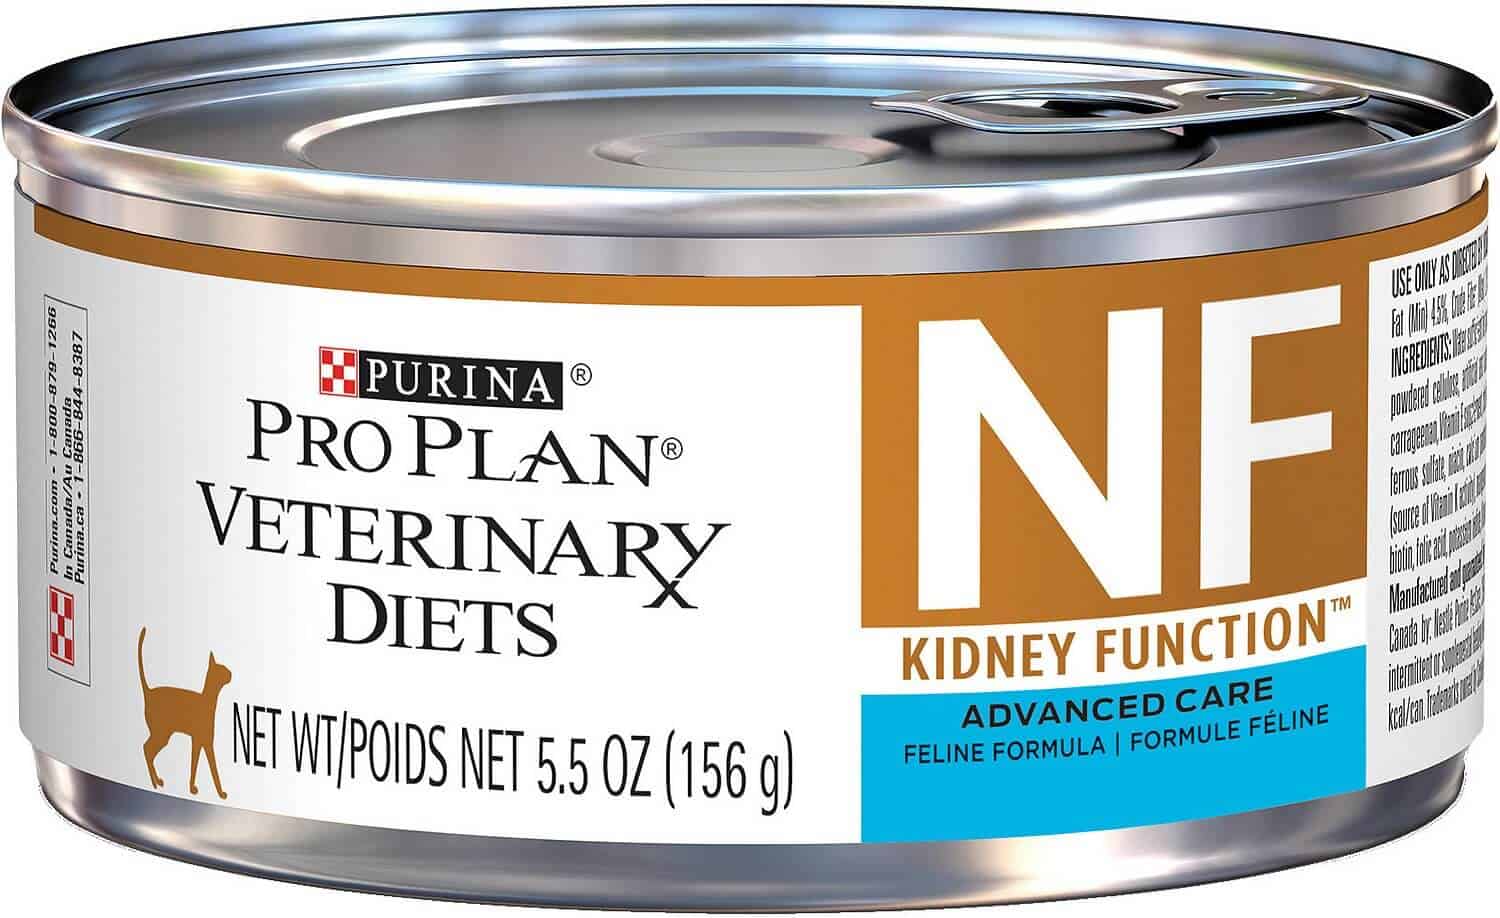 Purina-Pro-Plan-Veterinary-Diets-NF-Kidney-Function